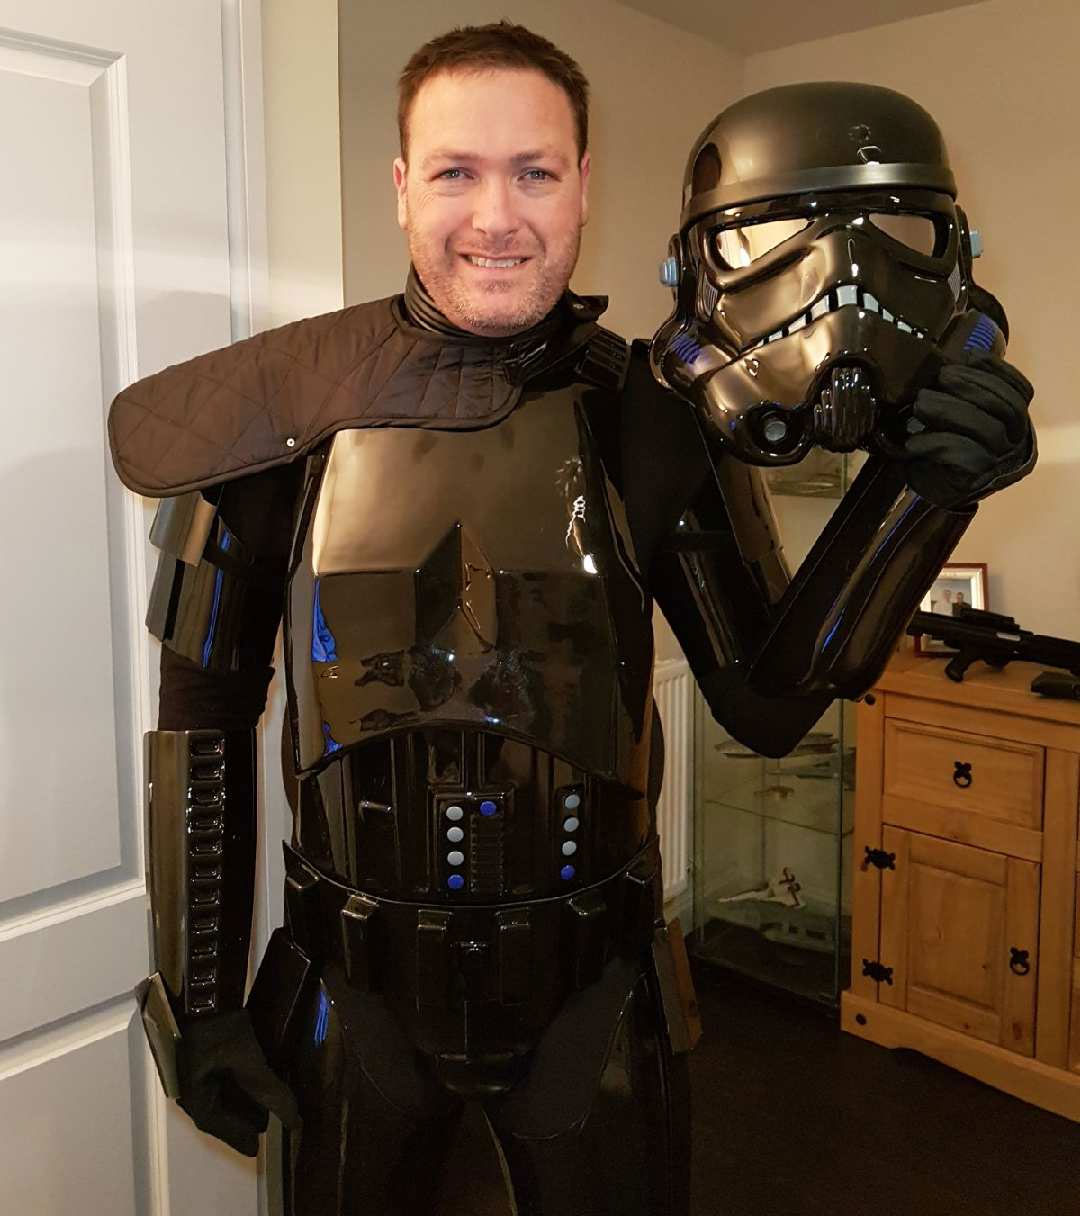 Shadowtrooper Replica Armour Review from Marc